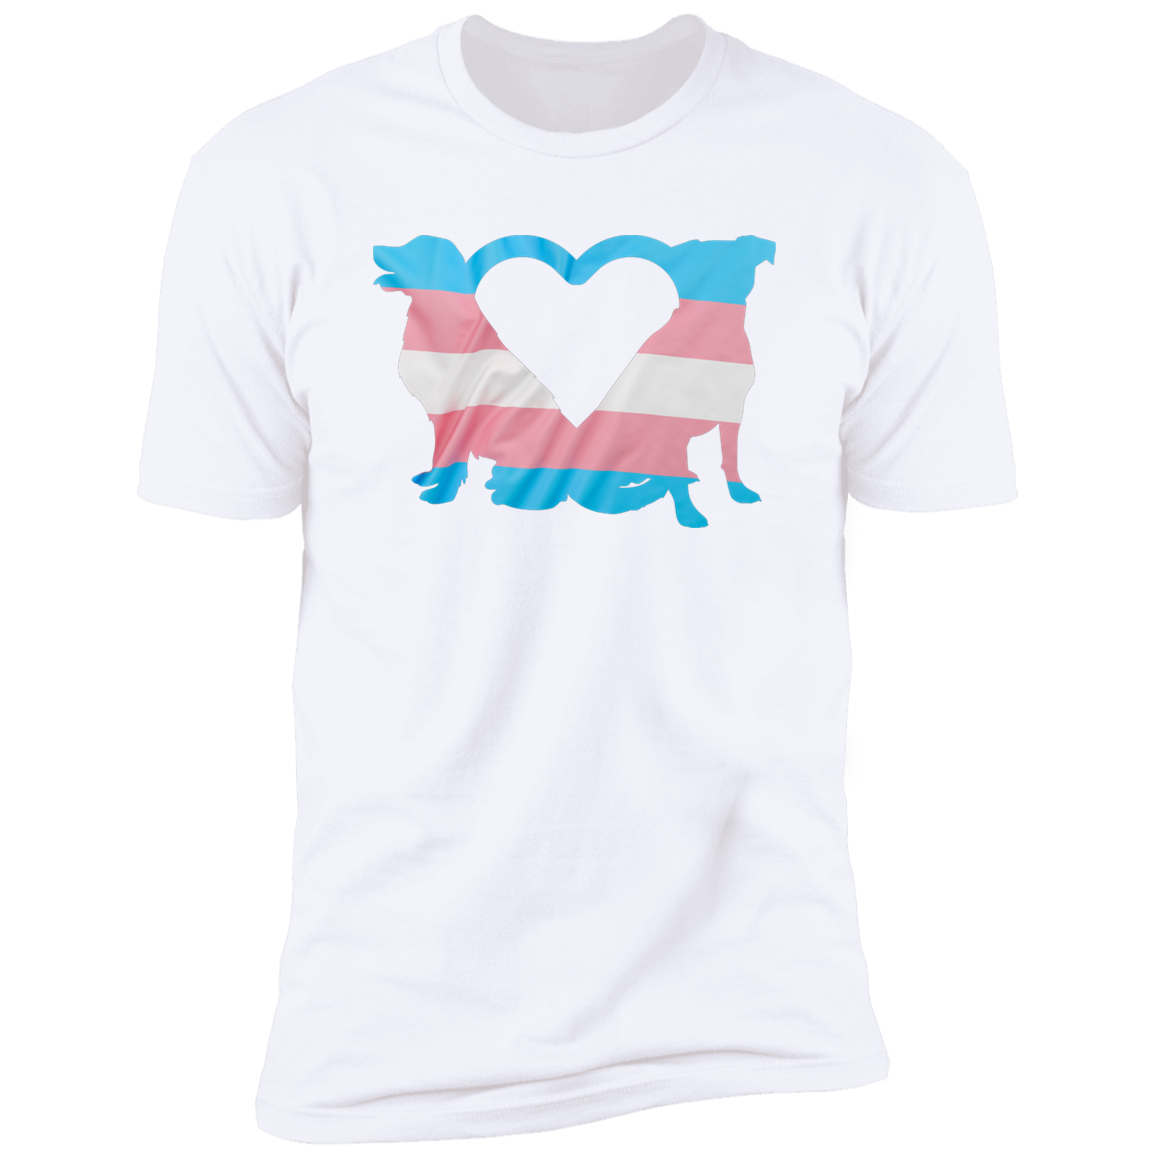 Trans Pride Dogs Heart Pride T-shirt, Trans Pride Dog Shirt for humans, in white